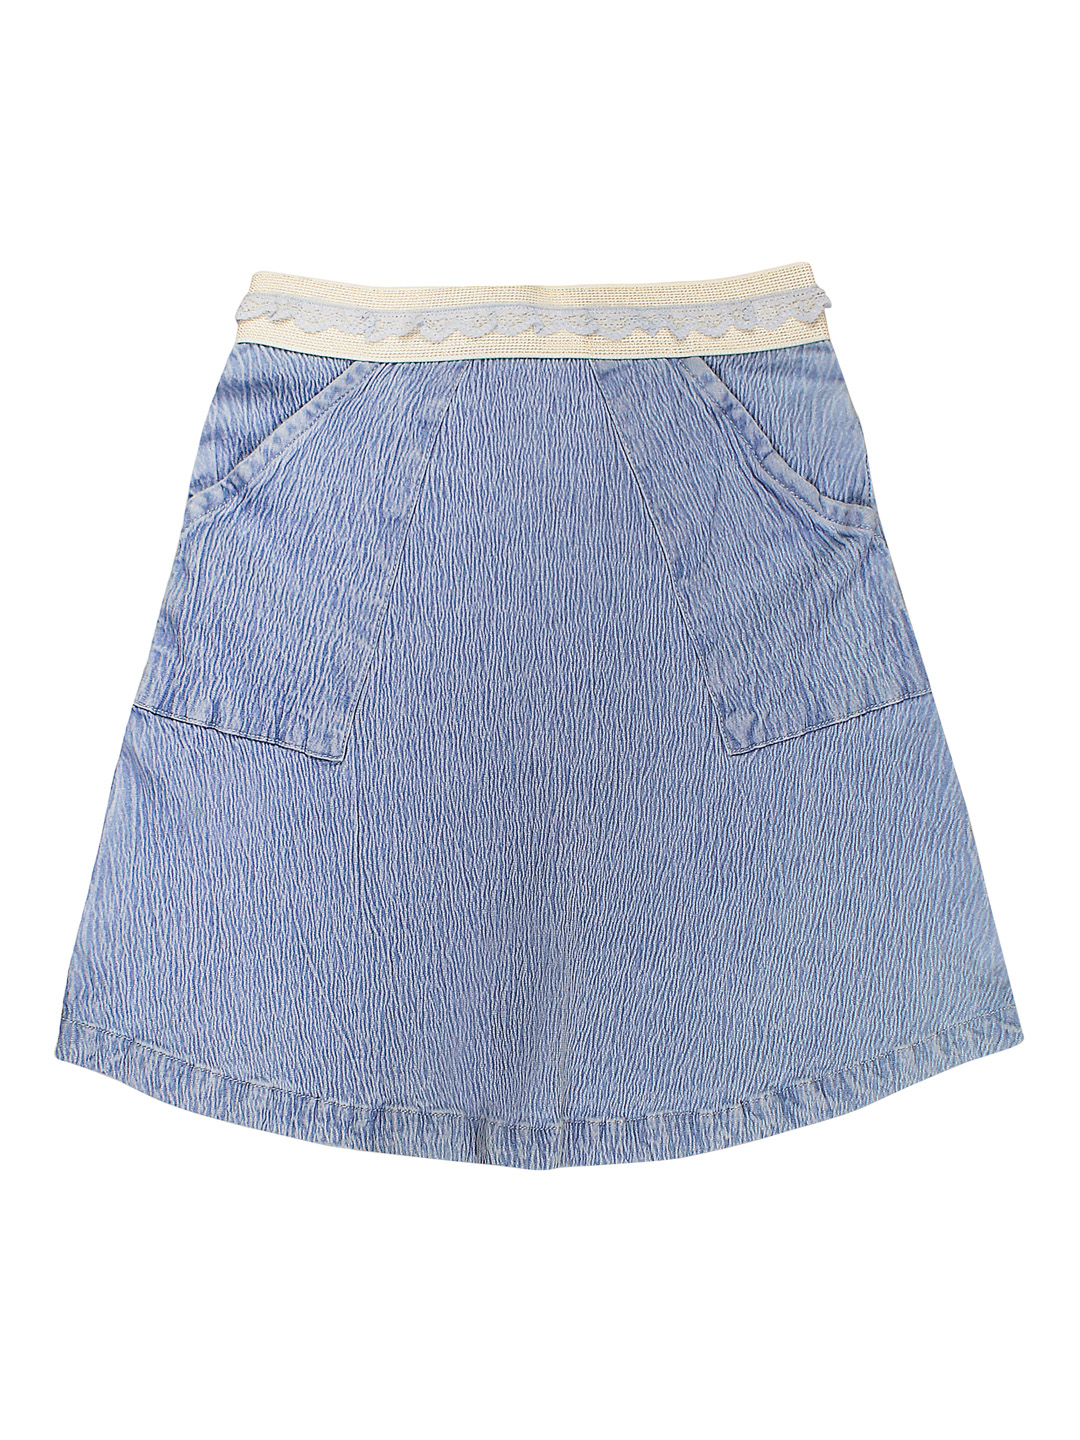 ShopperTree Blue Denim A-Line Skirt Price in India